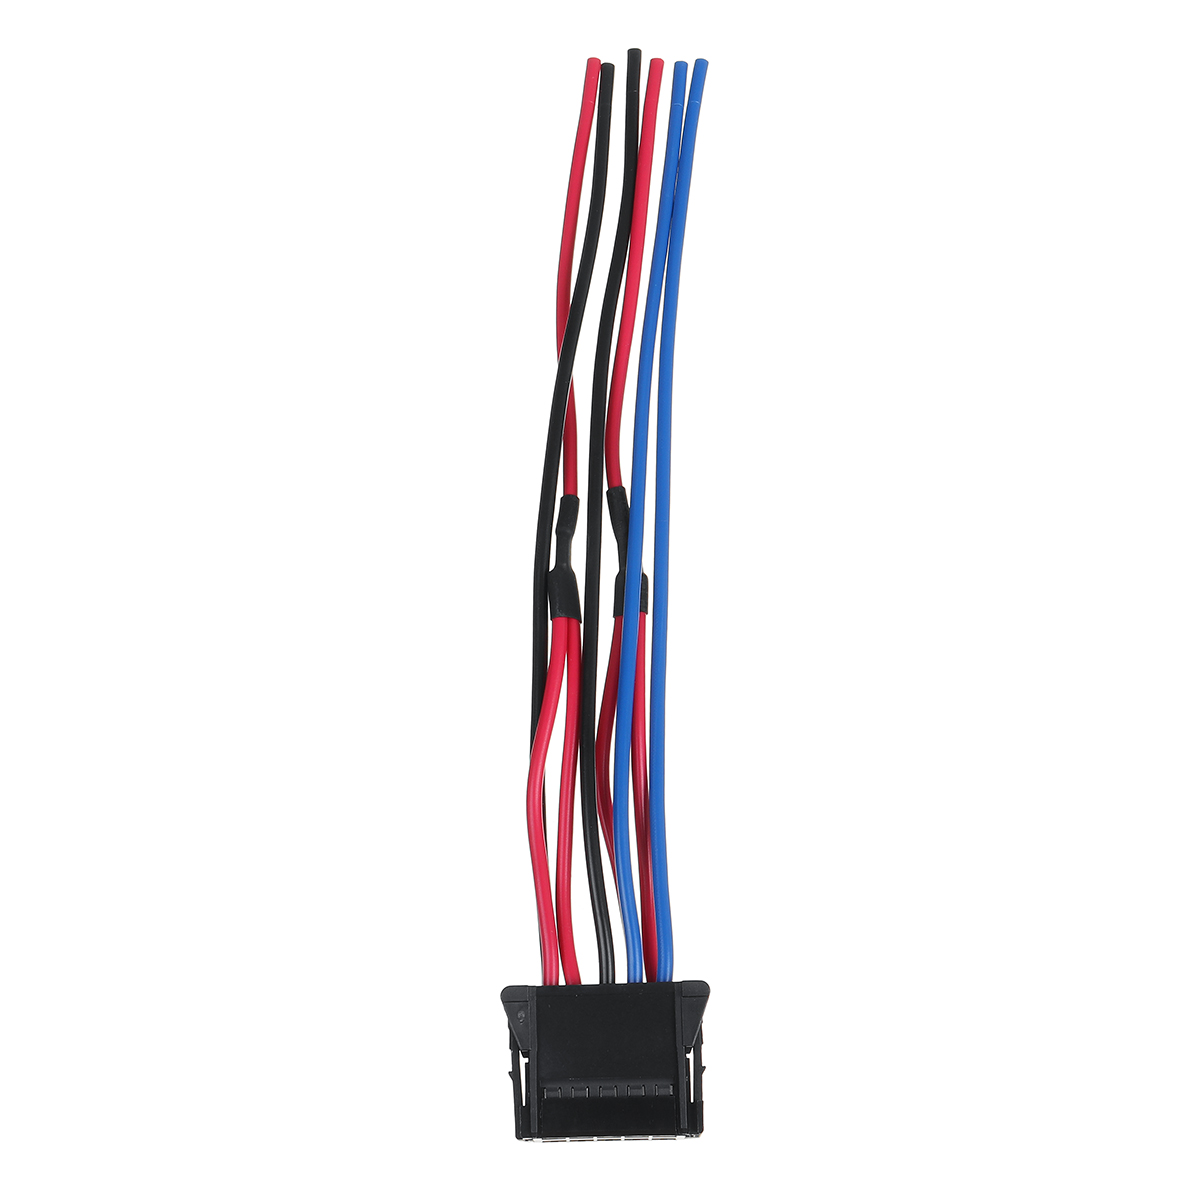 Heater Resistor Wiring Harness for Renault Clio Grand Scenic Modus